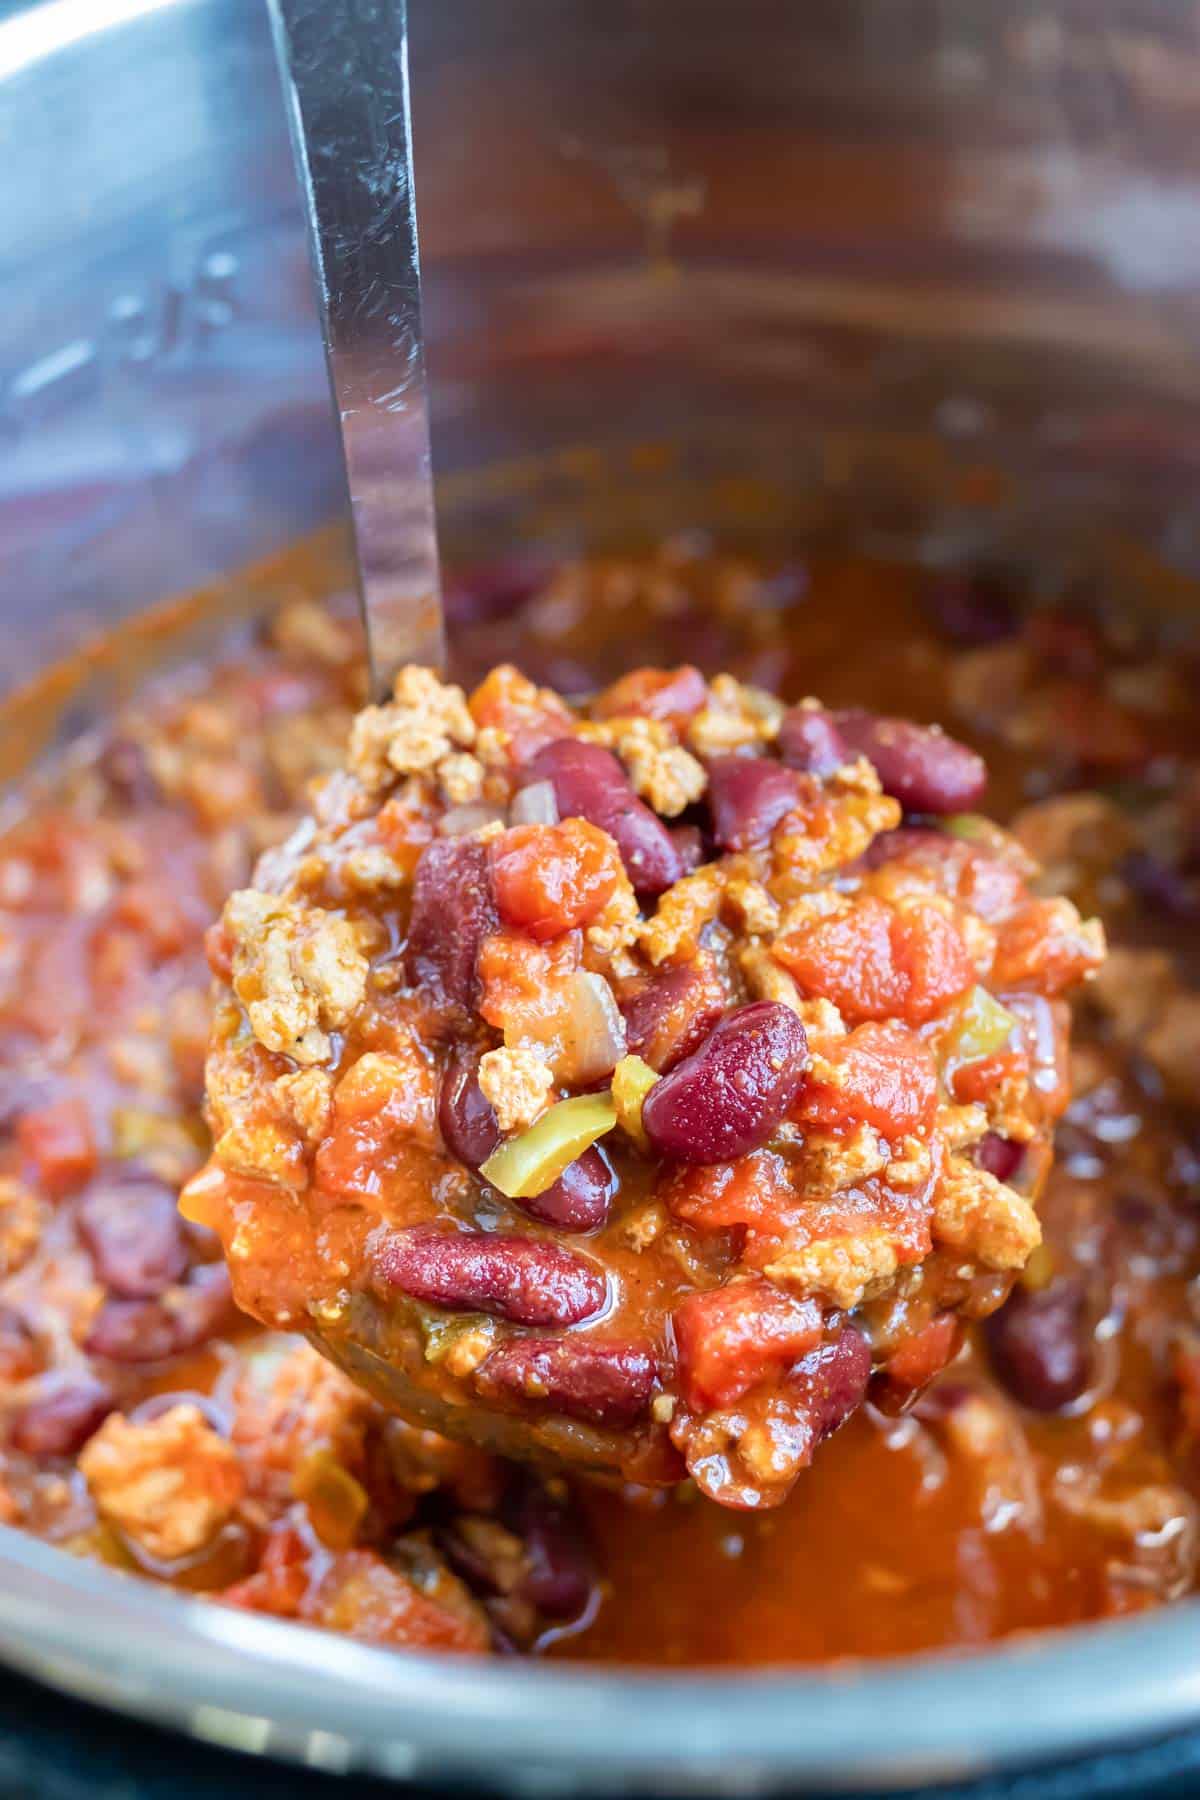 A ladle scooping out a serving of ground turkey chili from an Instant Pot.